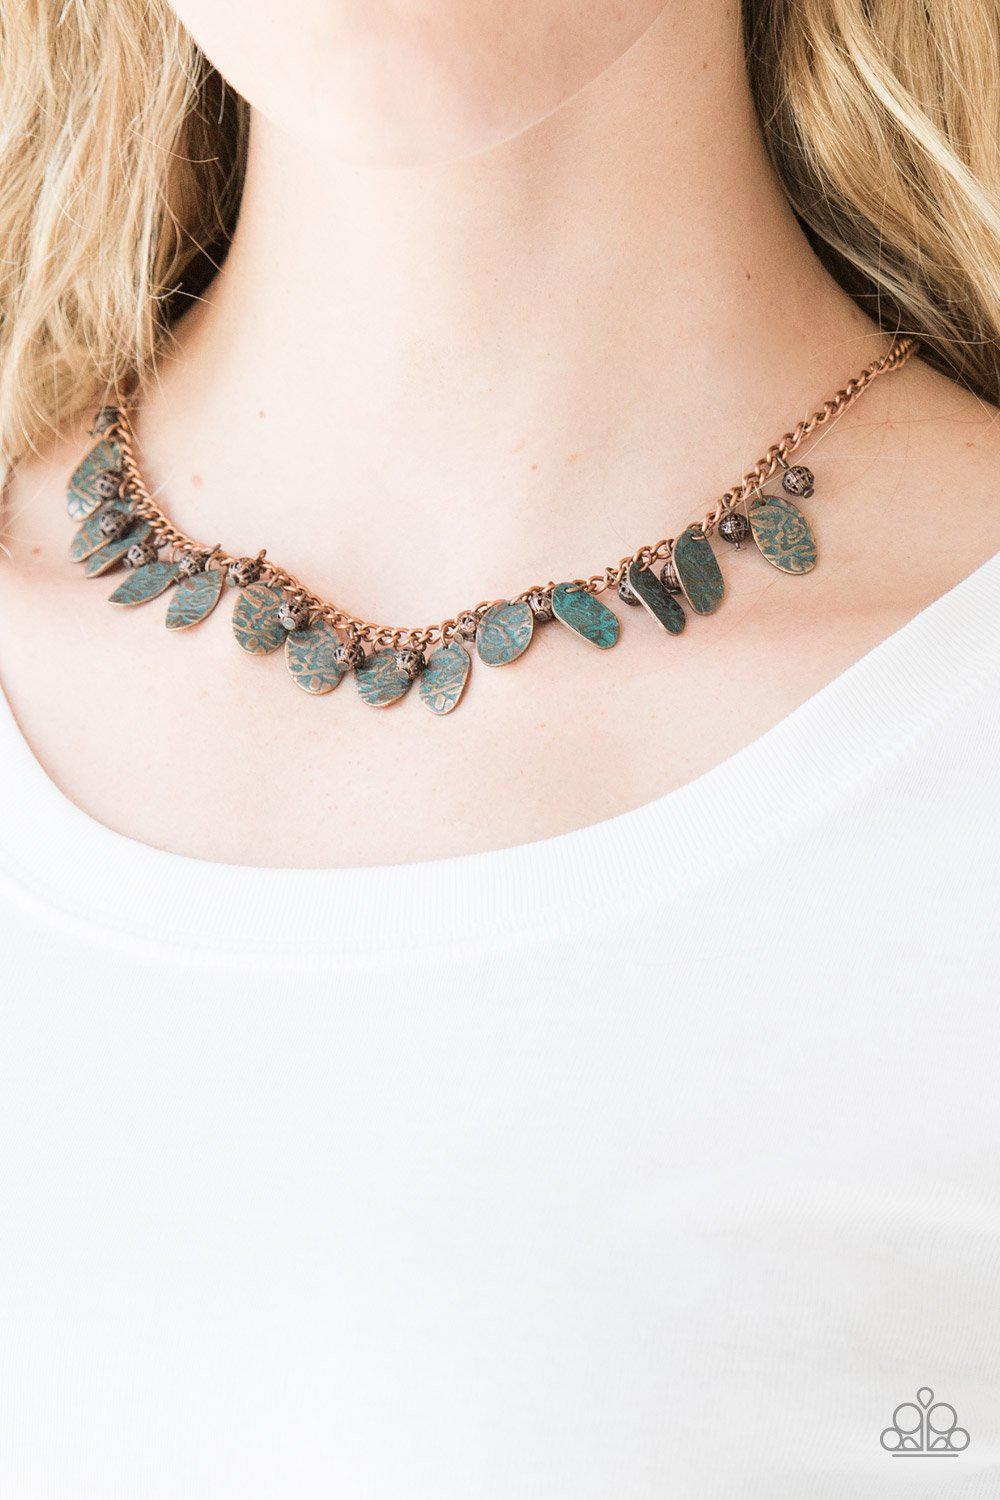 Vintage Gardens Copper Patina Finish Necklace - Paparazzi Accessories-CarasShop.com - $5 Jewelry by Cara Jewels